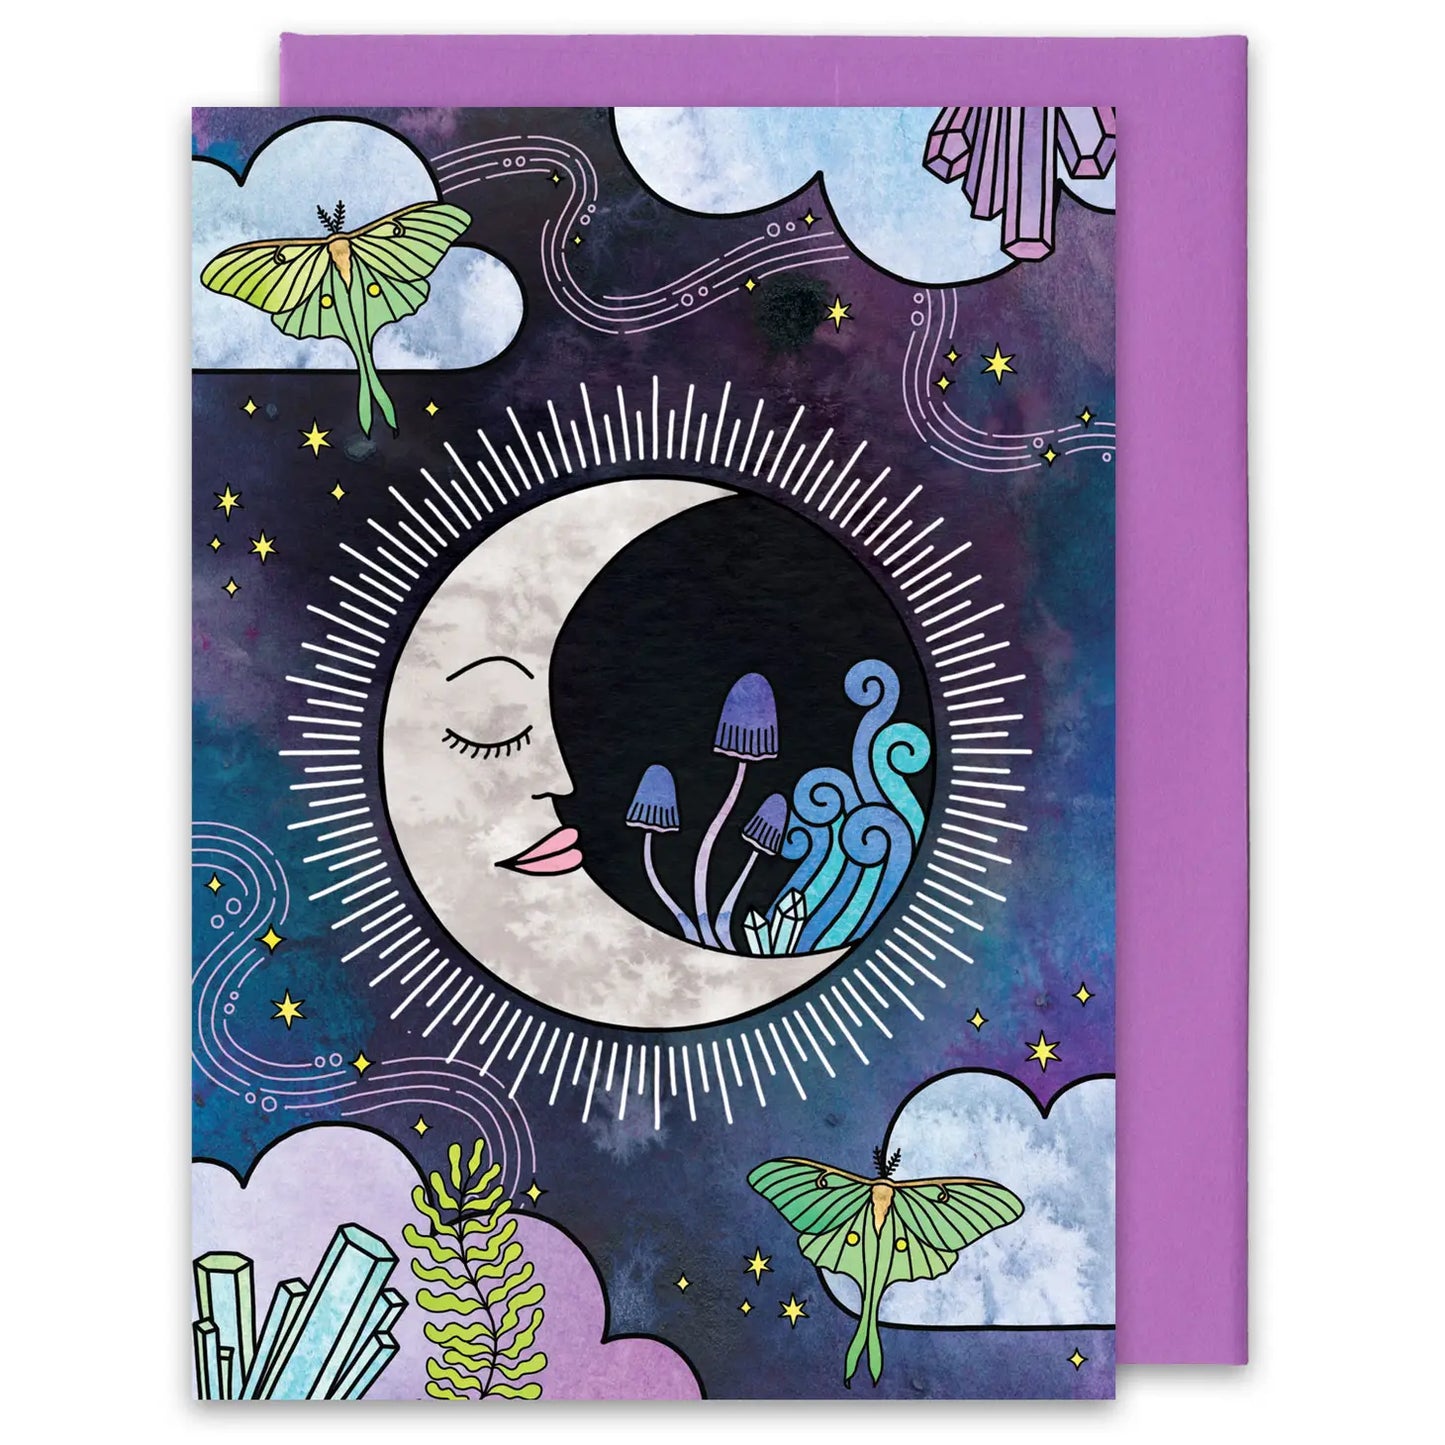 The Moon Greeting Card - Moon Room Shop and Wellness